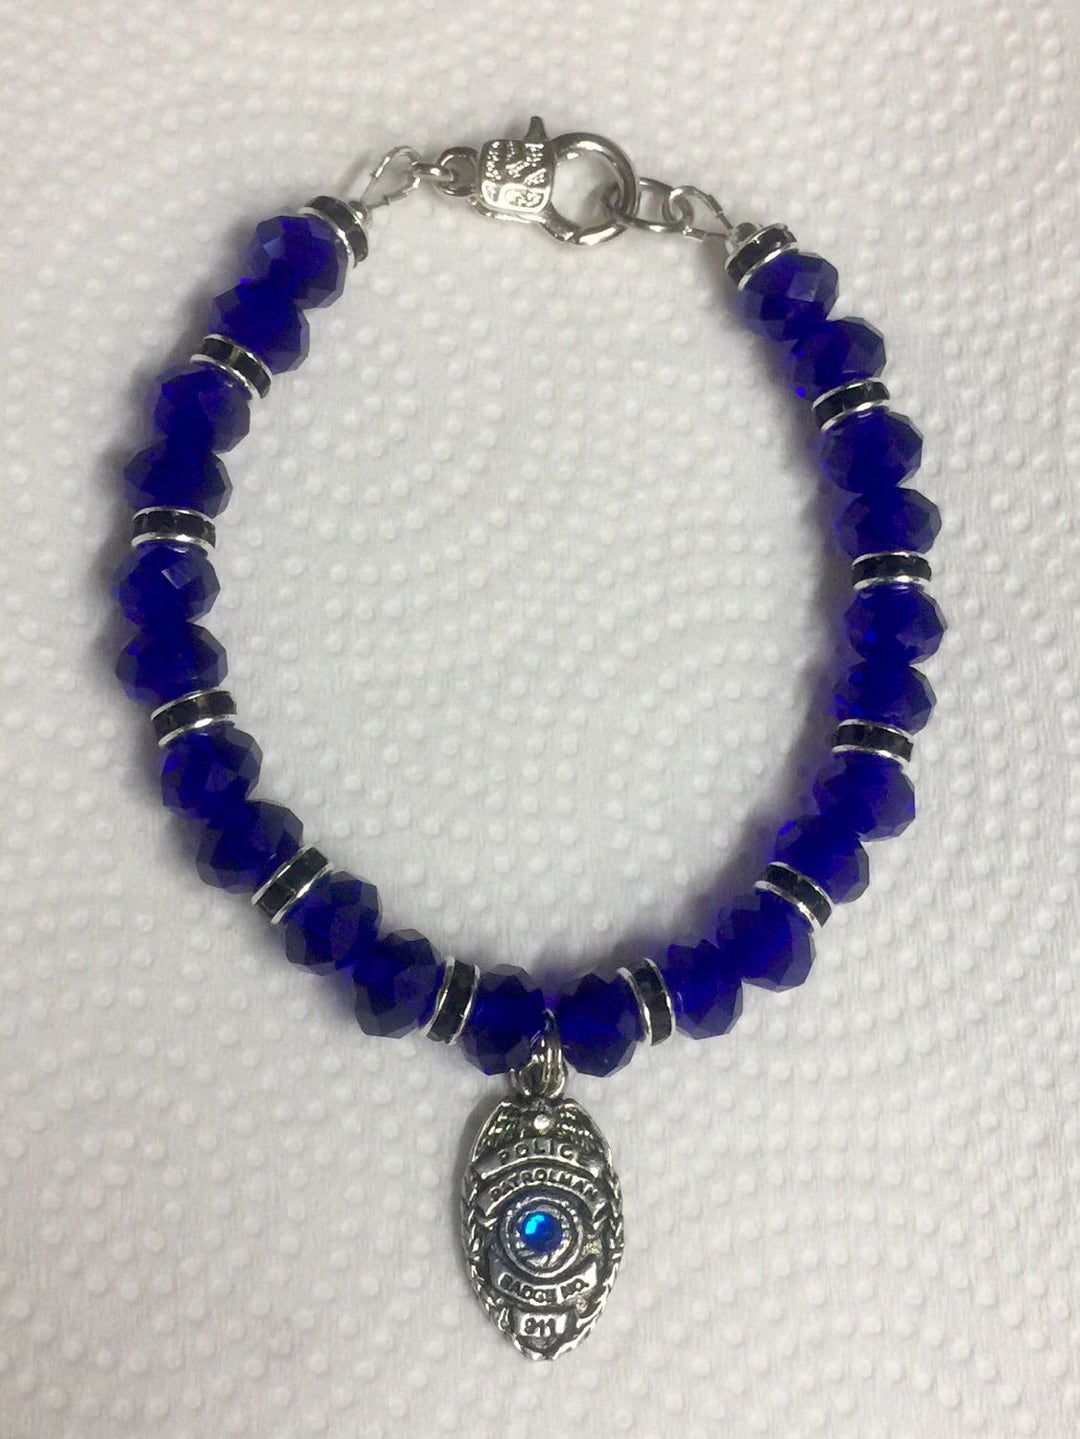 The Thin Blue Line Bracelet 2... Add a Charm or 2 or 3... FREE - Etsy